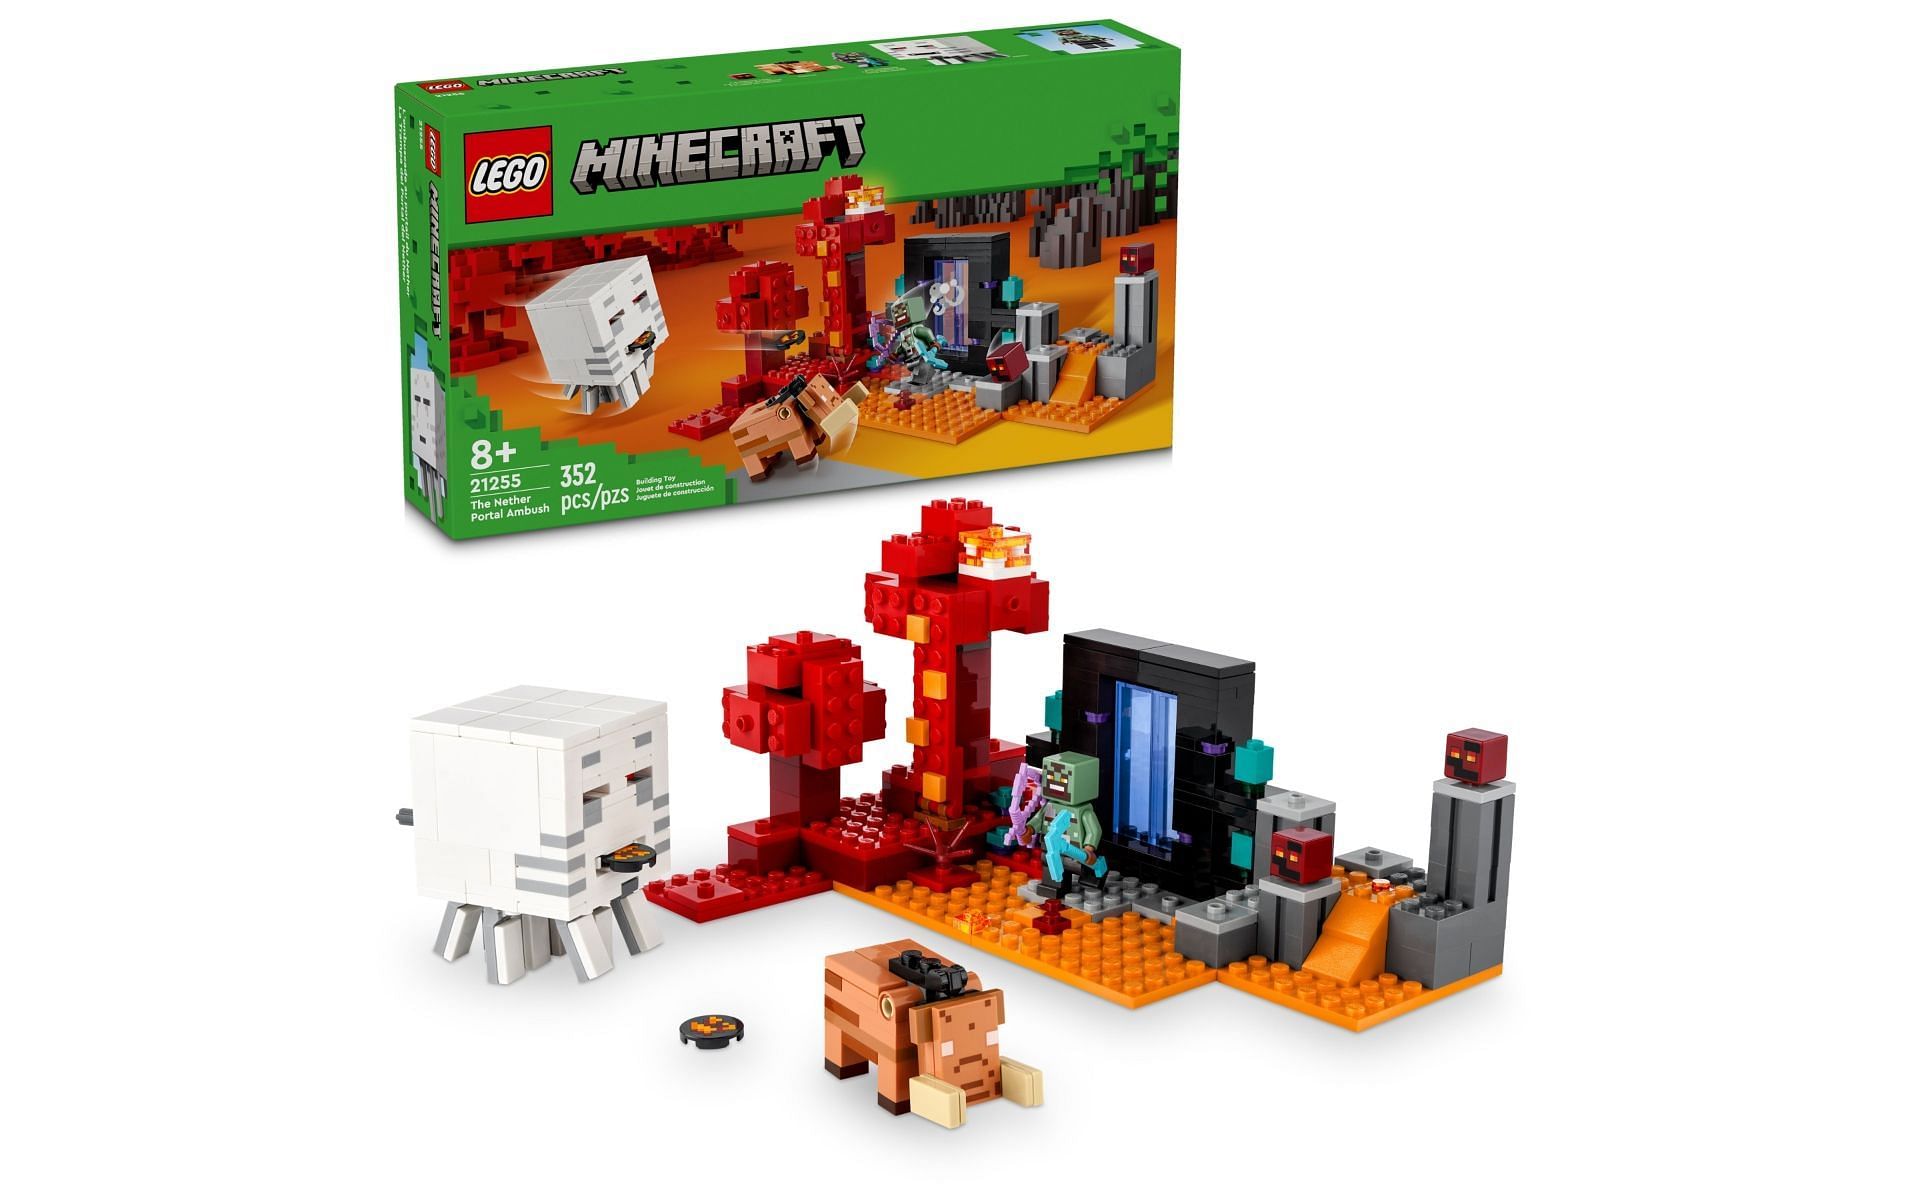 These new Lego Minecraft sets look decidedly more 'Lego' than ever